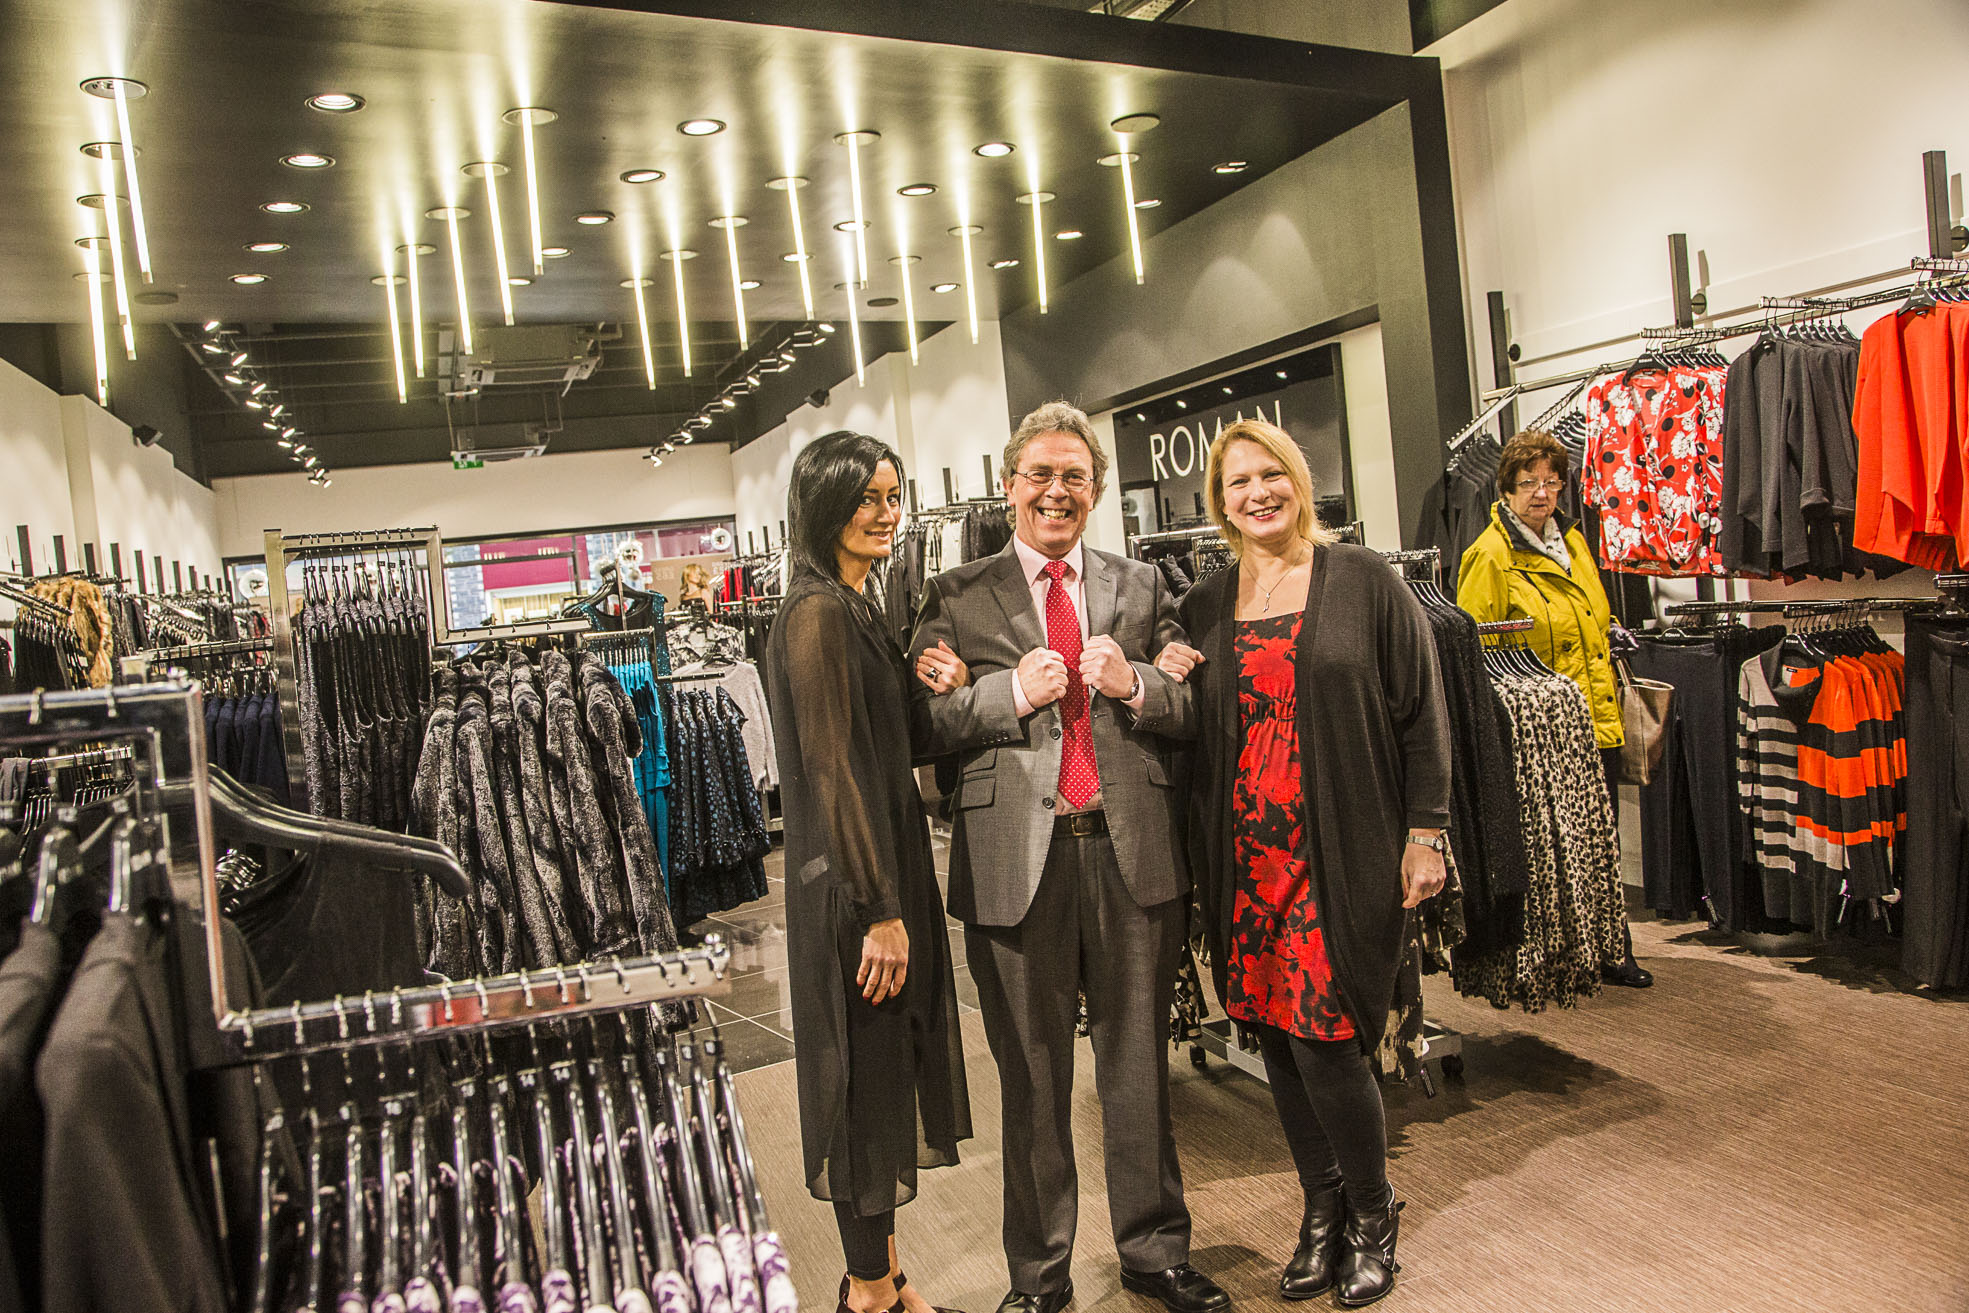 Fashion chain Roman creates five new jobs as it opens store in Wrexham